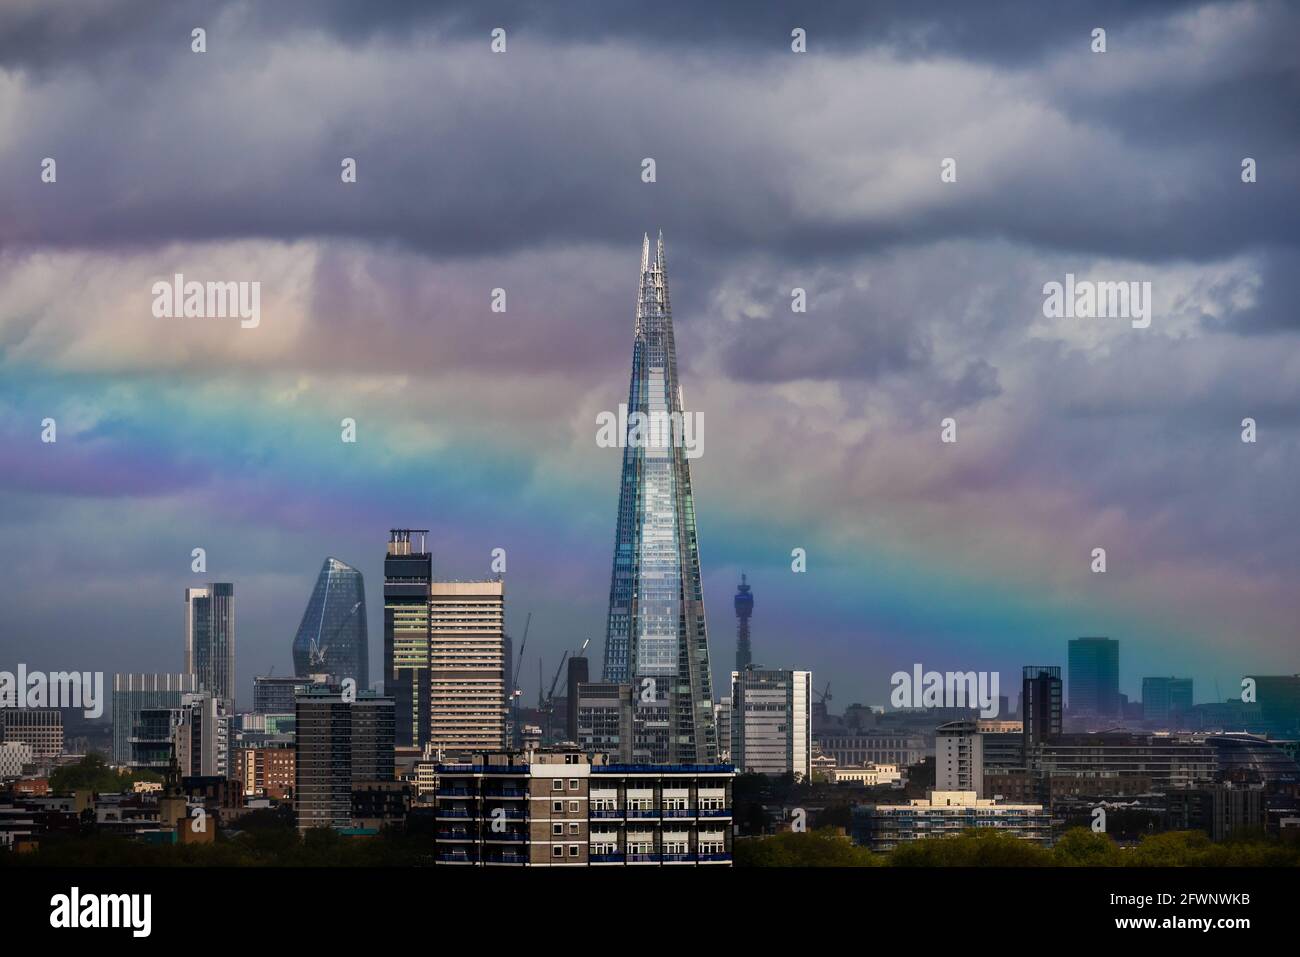 London, UK. 24th May, 2021. UK Weather: A massive rainbow breaks over The Shard skyscraper building after a brief morning rainstorm. Credit: Guy Corbishley/Alamy Live News Stock Photo